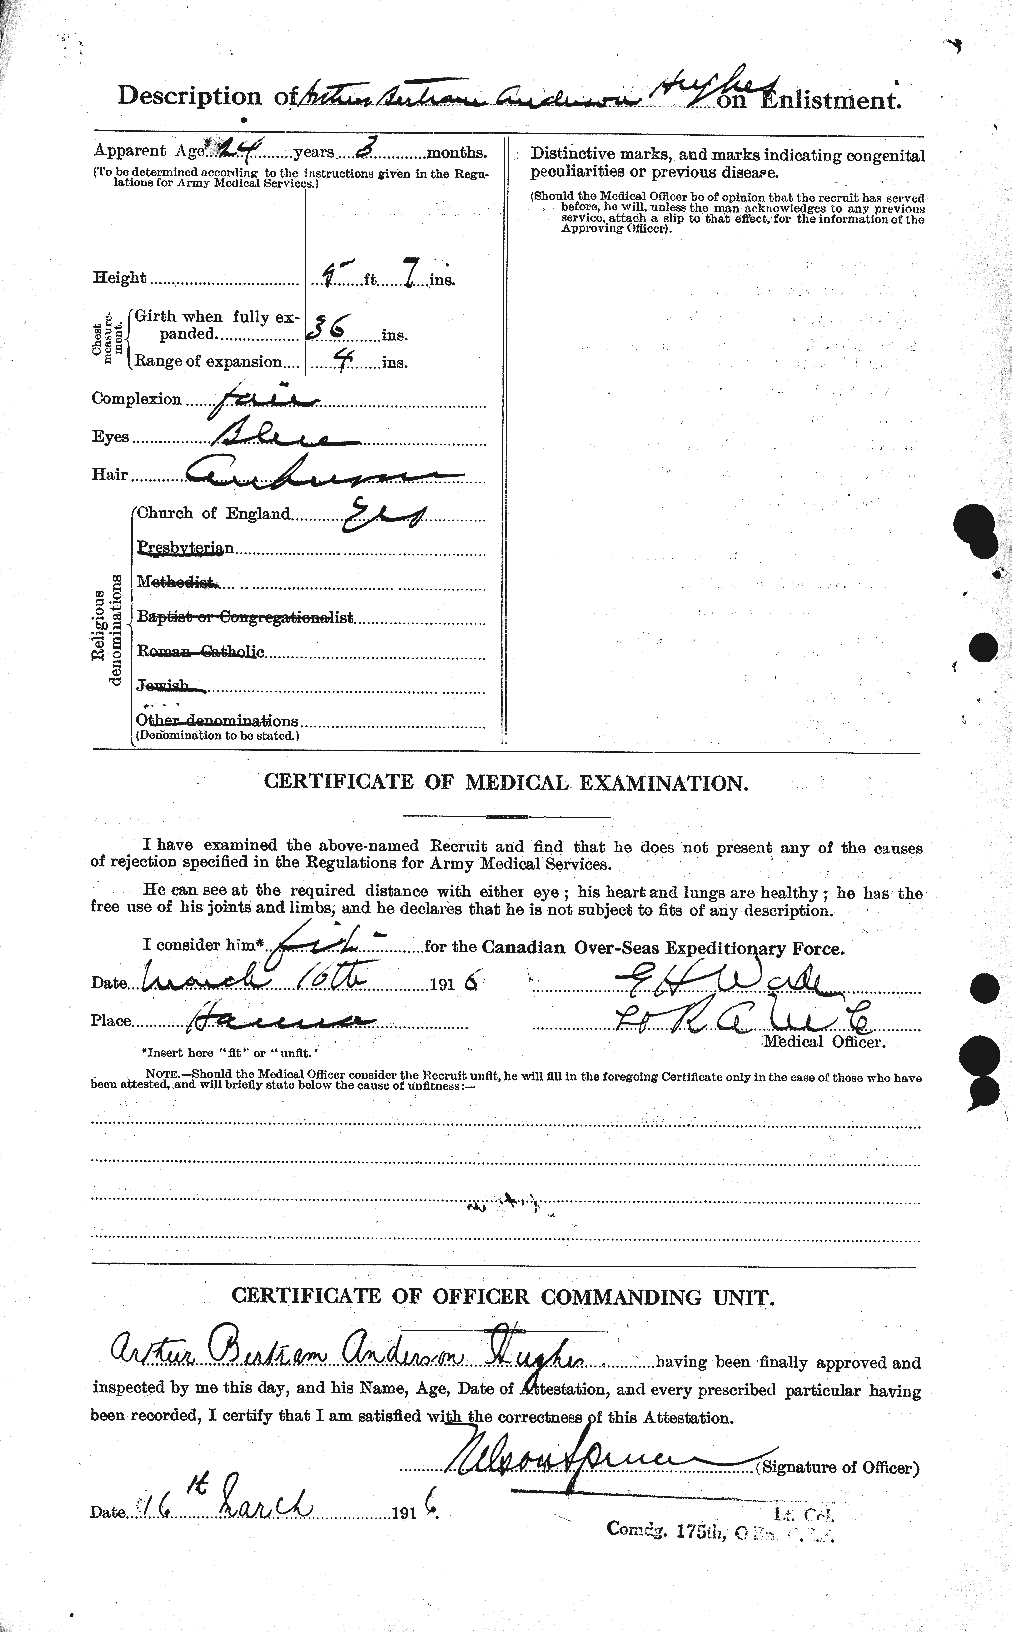 Personnel Records of the First World War - CEF 402563b